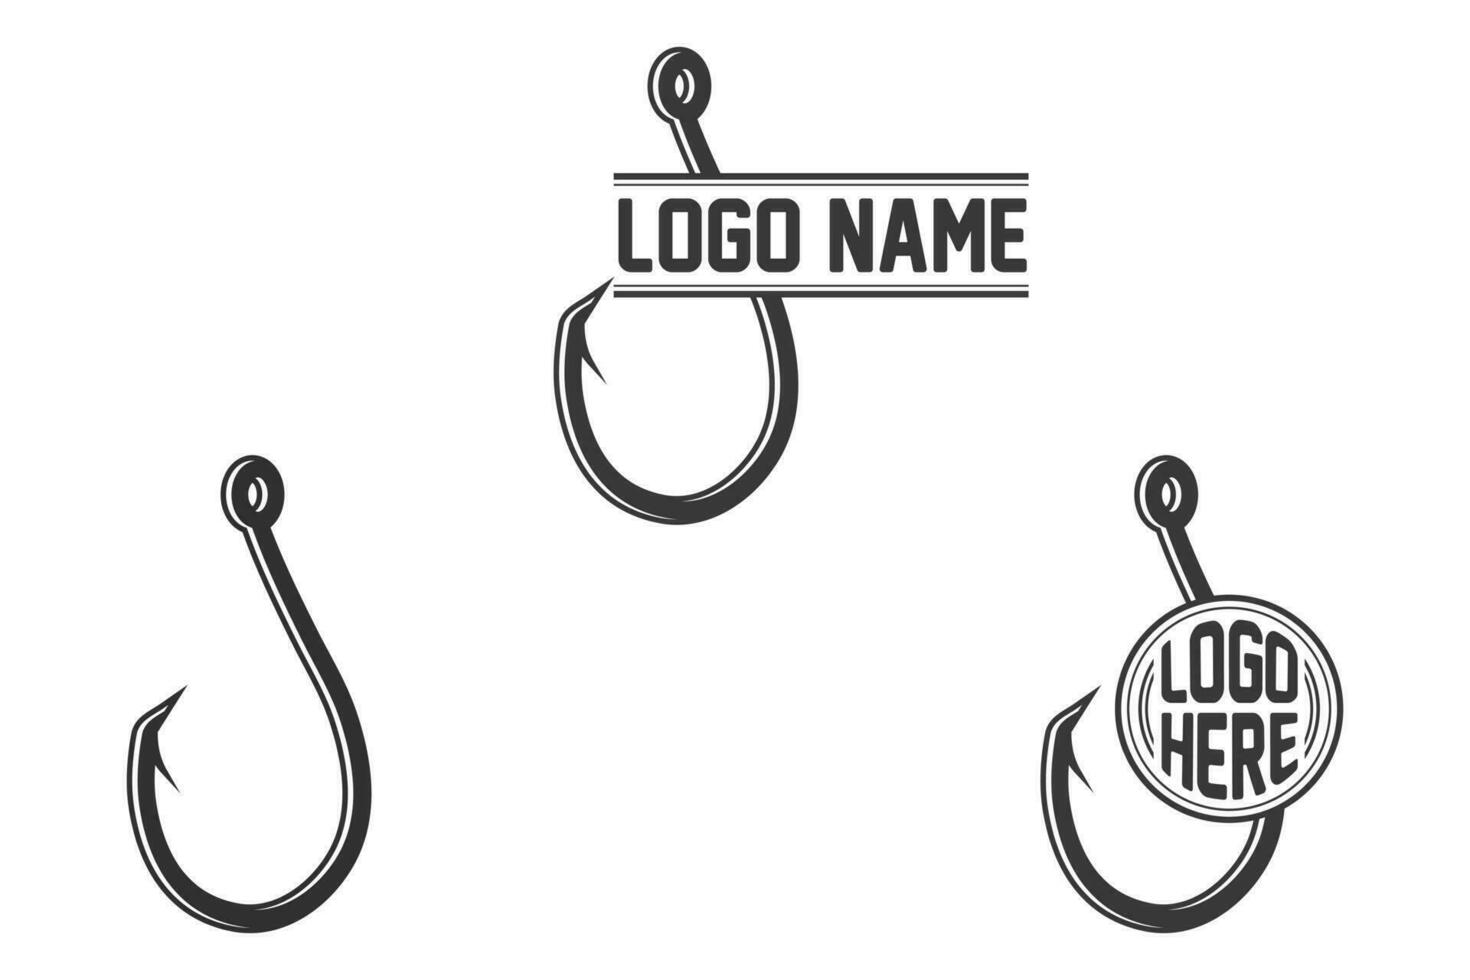 https://static.vecteezy.com/system/resources/previews/036/155/639/non_2x/fishing-hook-monogram-fishing-logo-fishing-hook-logo-fishing-hook-fishhook-silhouette-fishing-hook-set-fishing-hook-logo-retro-style-fishing-hooks-collection-vector.jpg